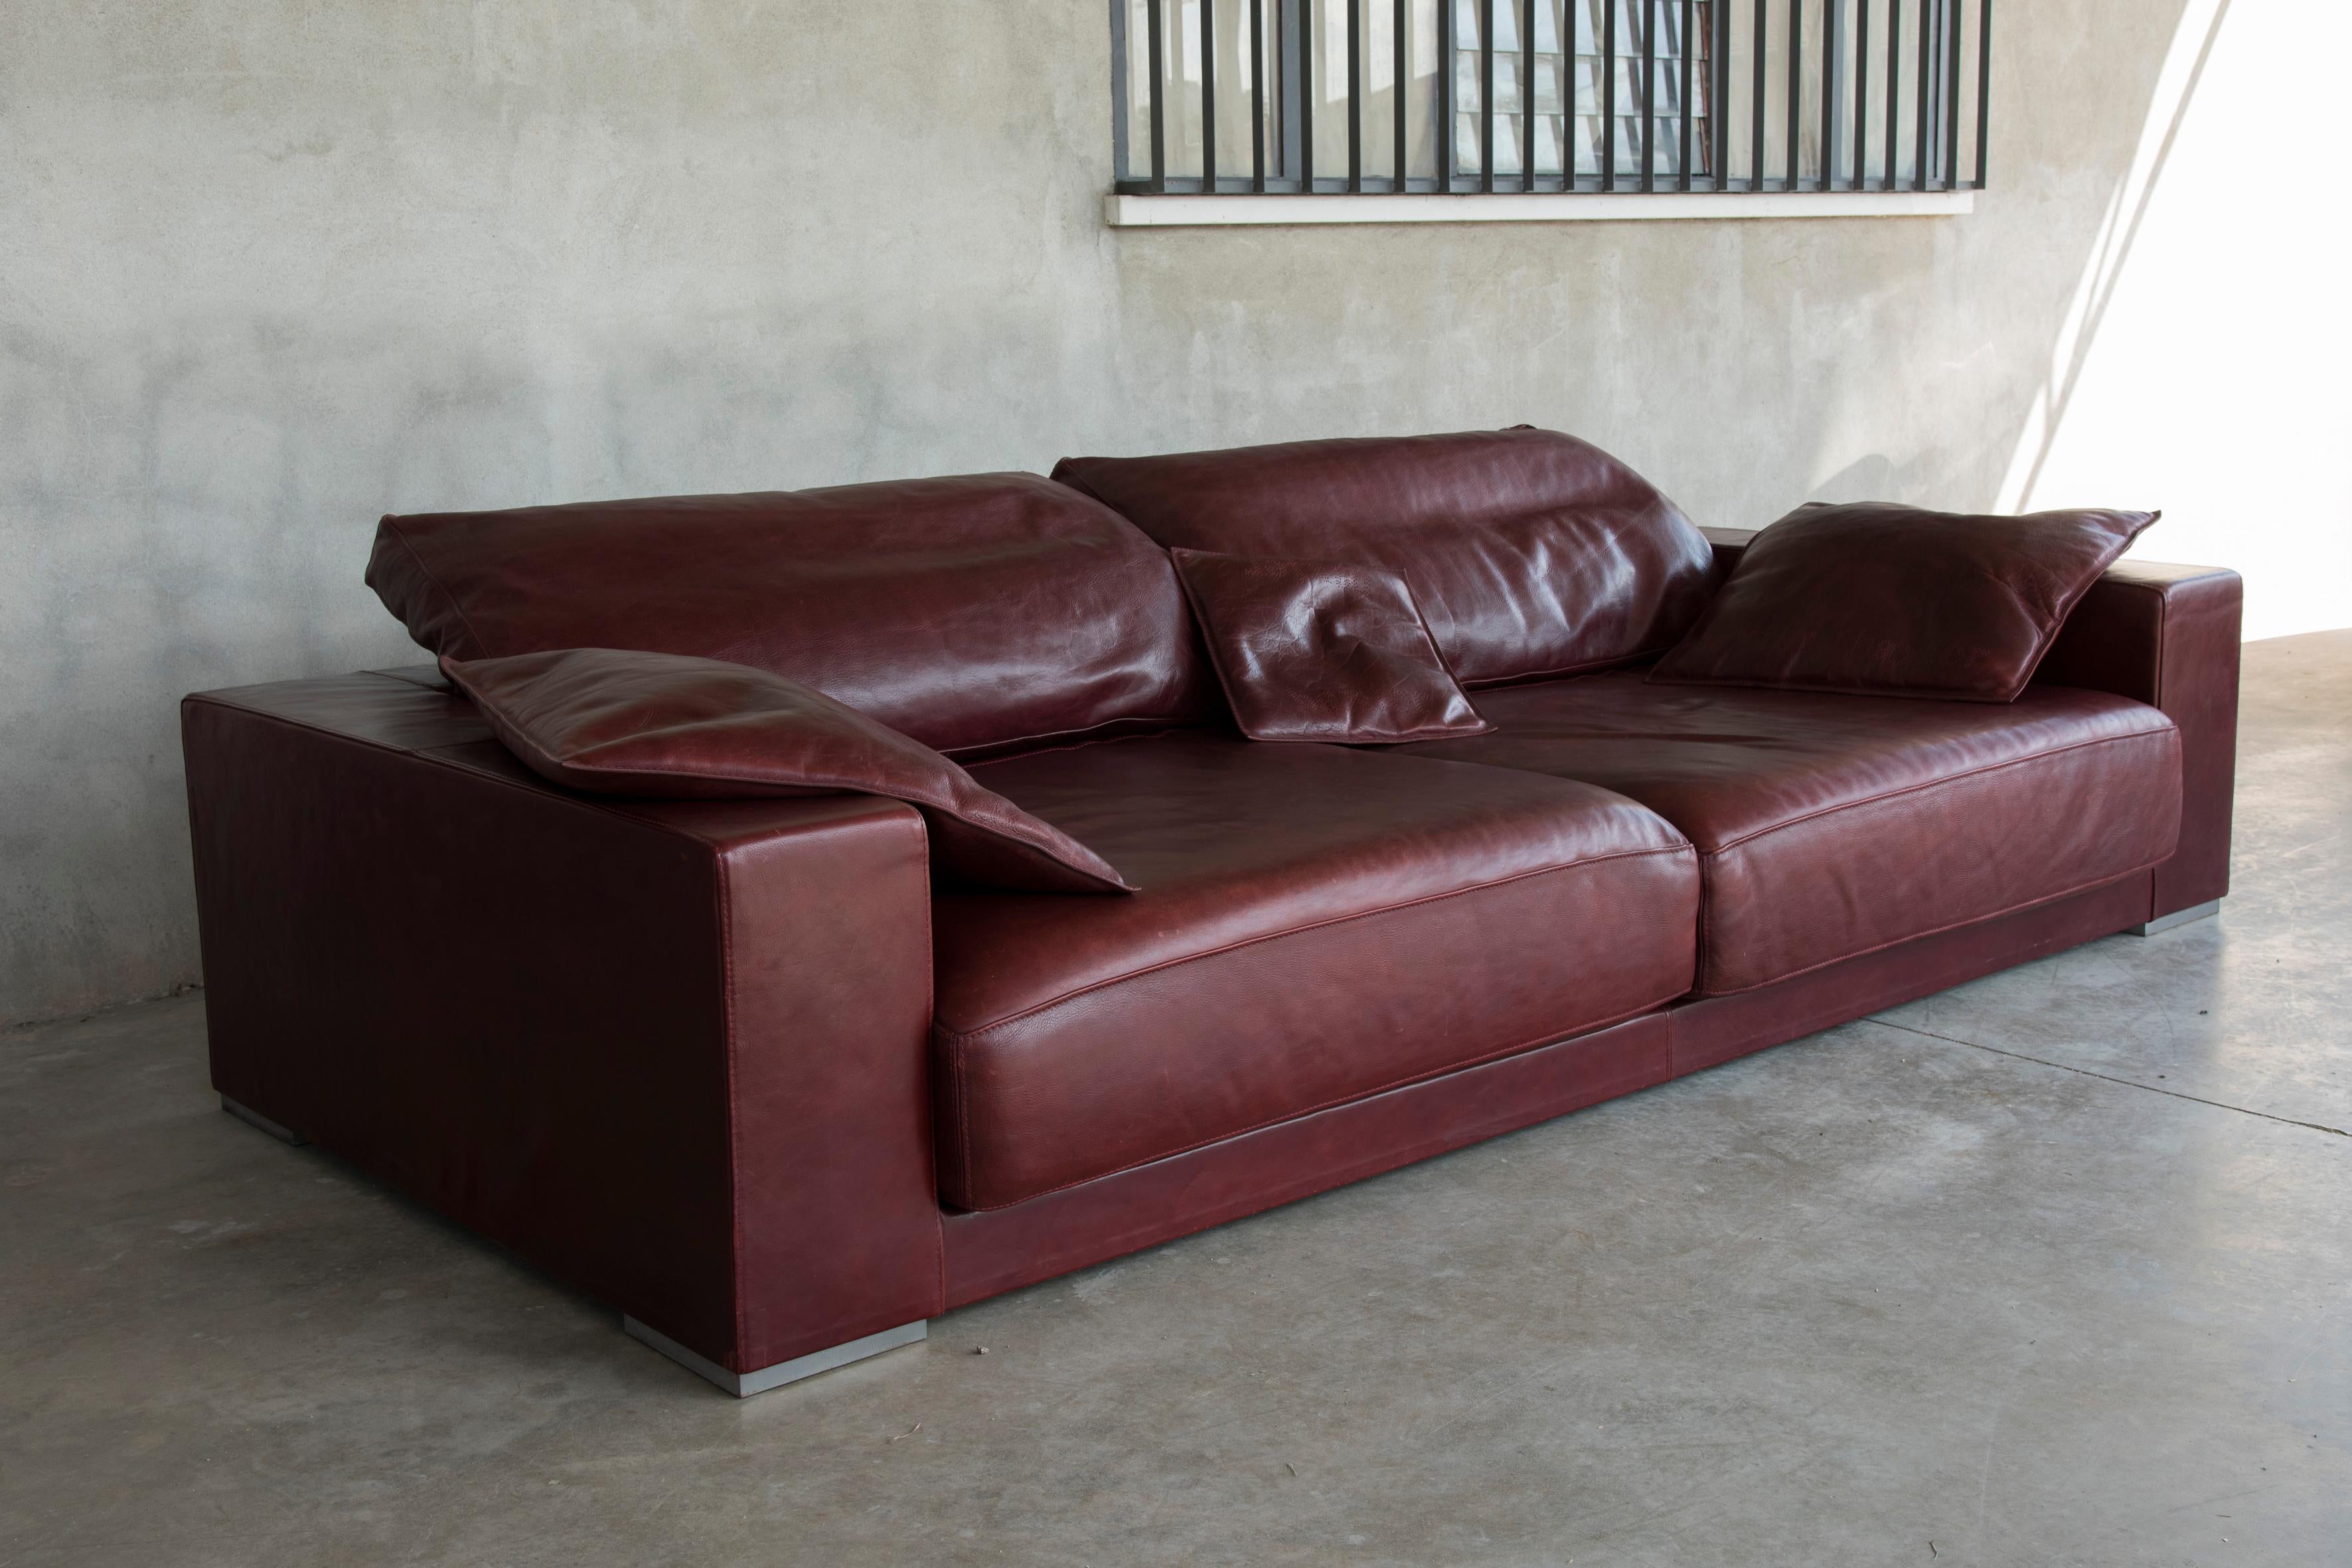 Budapest Baxter sofa tuscany red leather 300 cm long .

The Budapest model is the first sofa designed by Paola Navone for Baxter in 2003 . It has an essential and modern design, but comfortable and characterized by a wrapping seating thanks to its